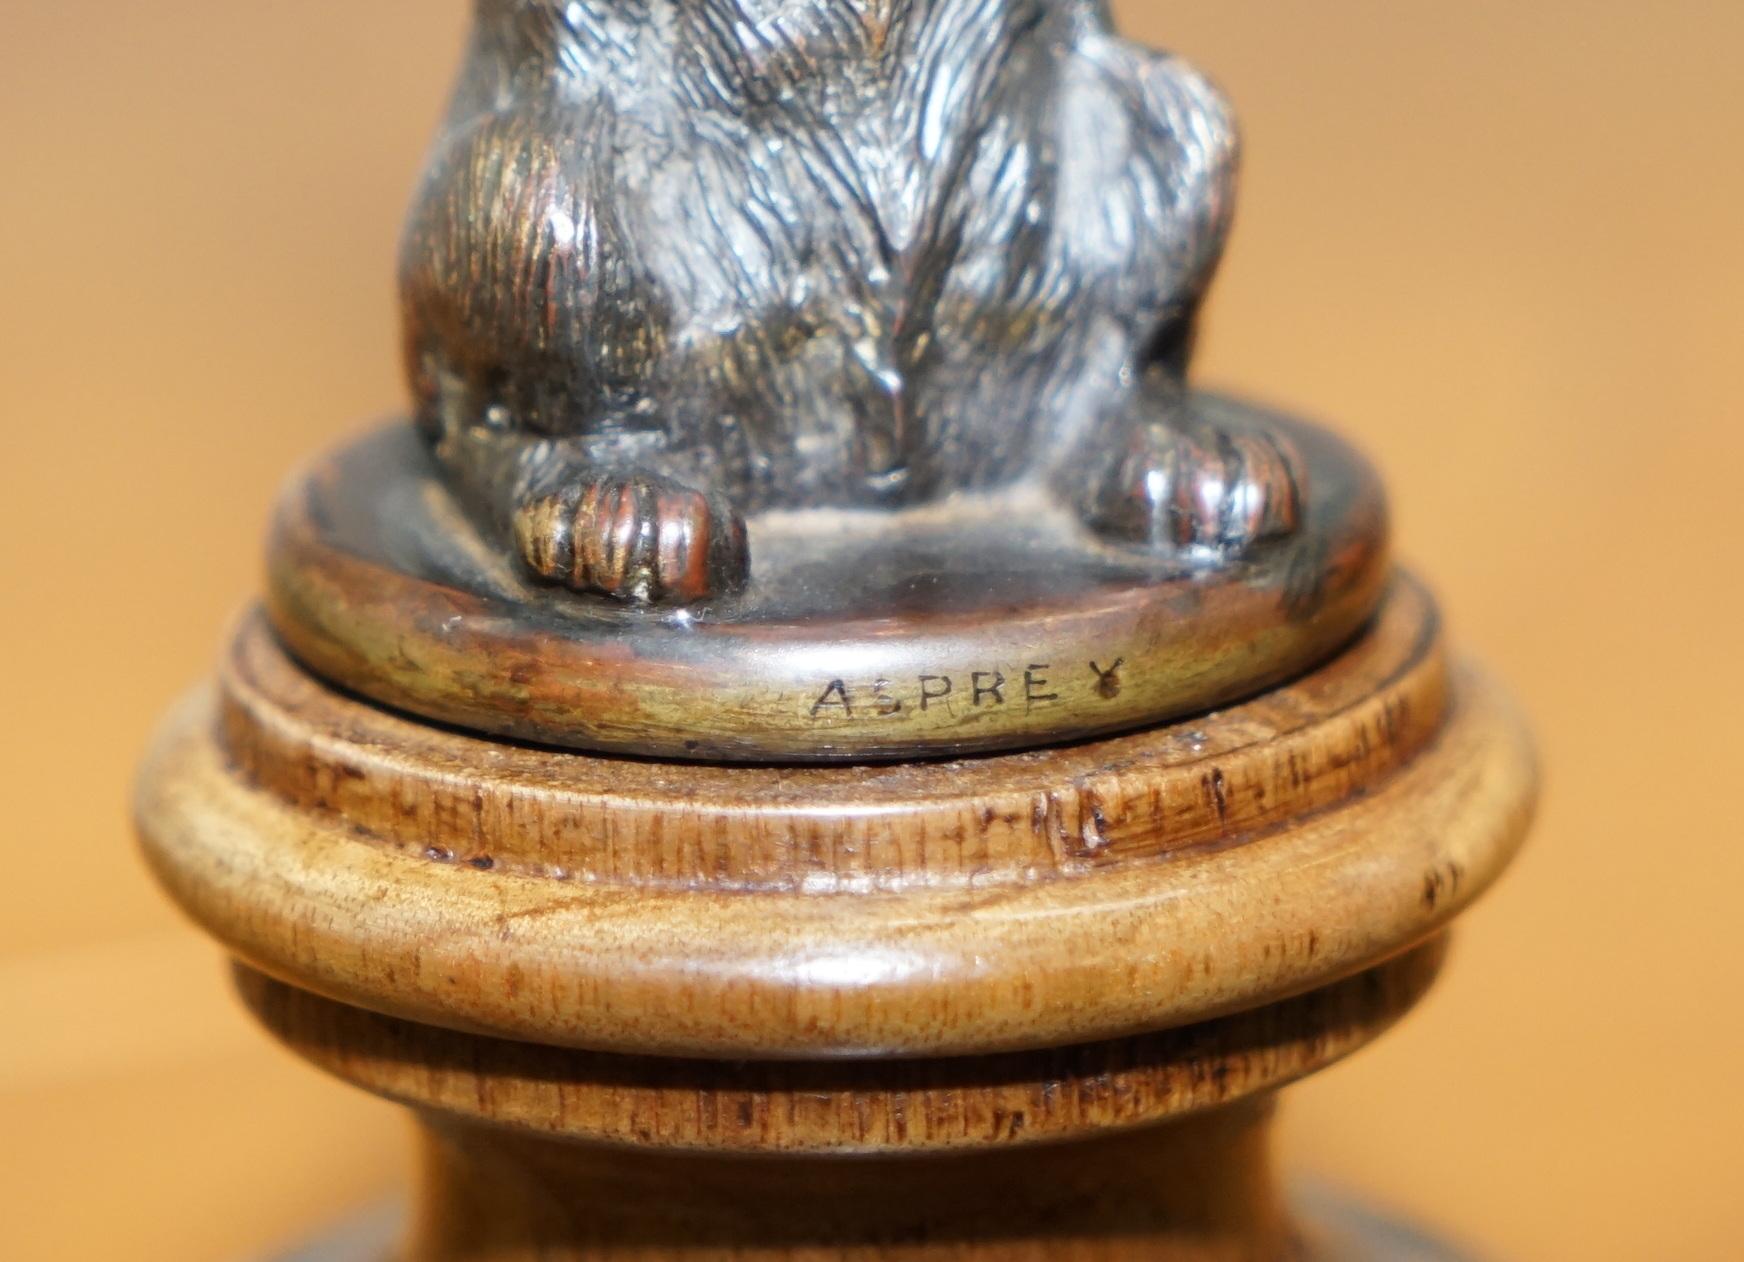 We are delighted to offer for sale this stunning and very rare solid bronze 1920 Asprey London car mascot of a begging Scottie dog

These pieces are exceptionally rare and highly collectable, Asprey made a limited run of these, some in nickel,